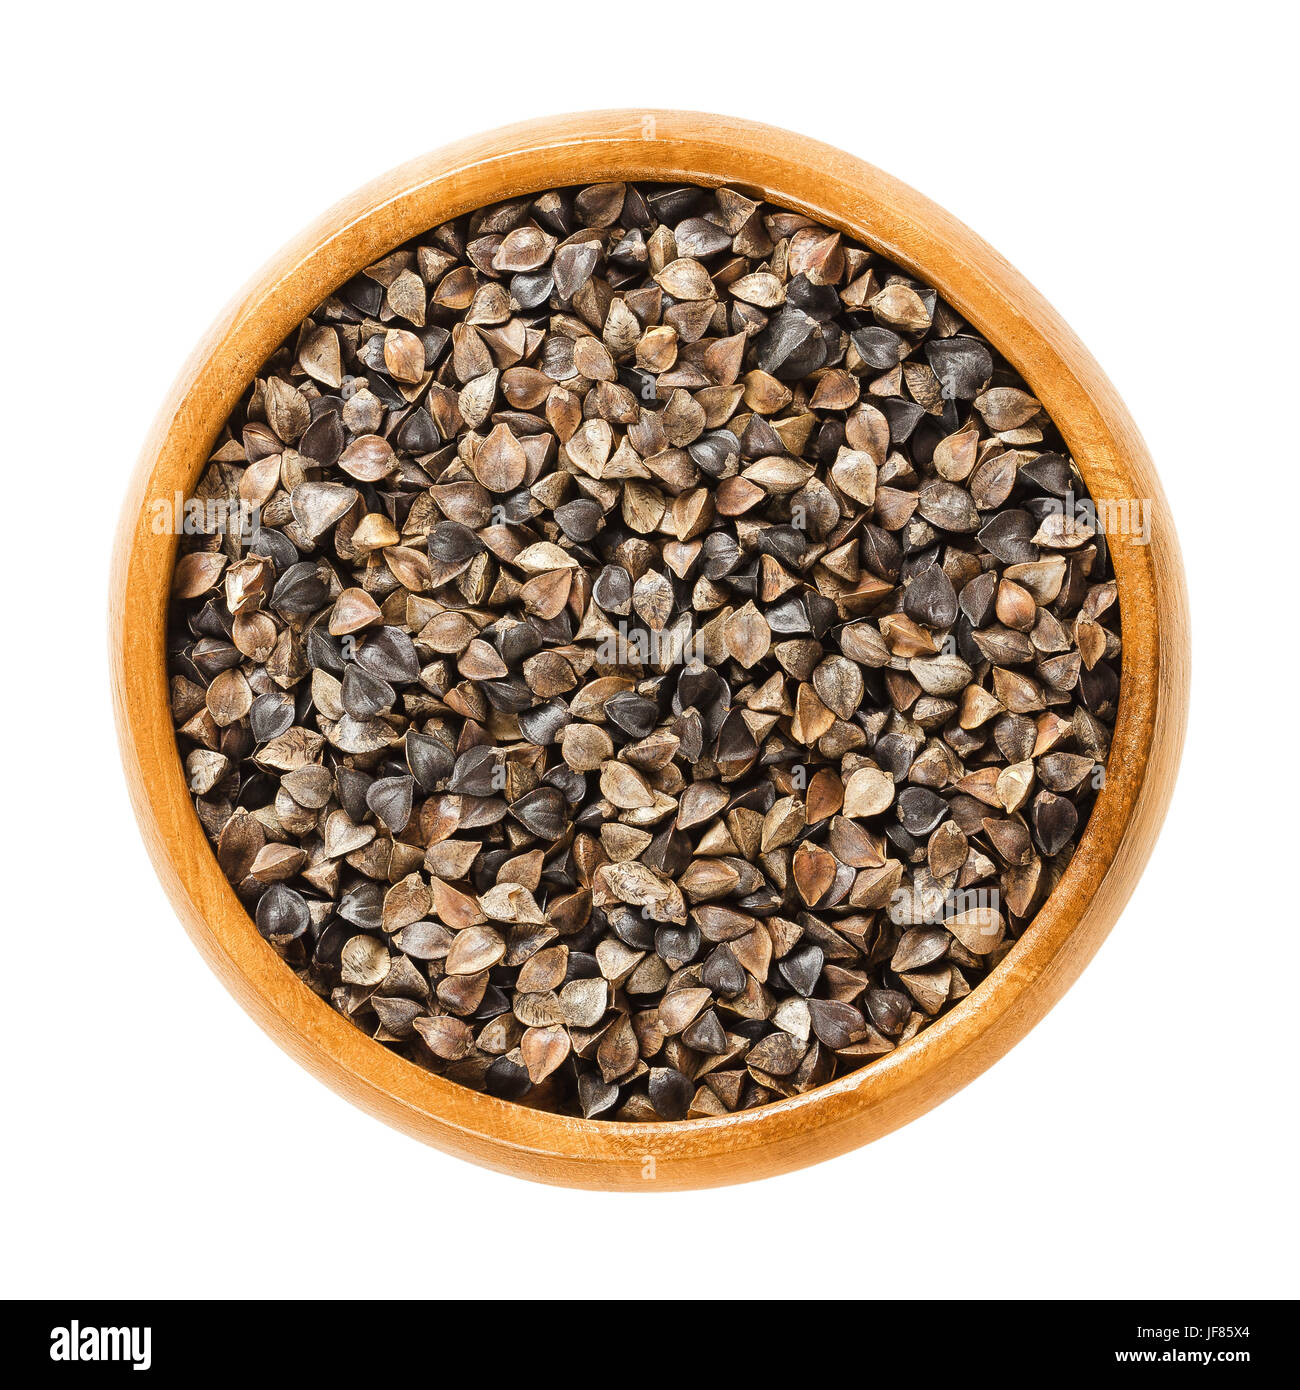 Common buckwheat seeds with hulls in wooden bowl. Fagopyrum esculentum, also Japanese or silverhull buckwheat. Gluten free pseudocereal. Dried seeds. Stock Photo